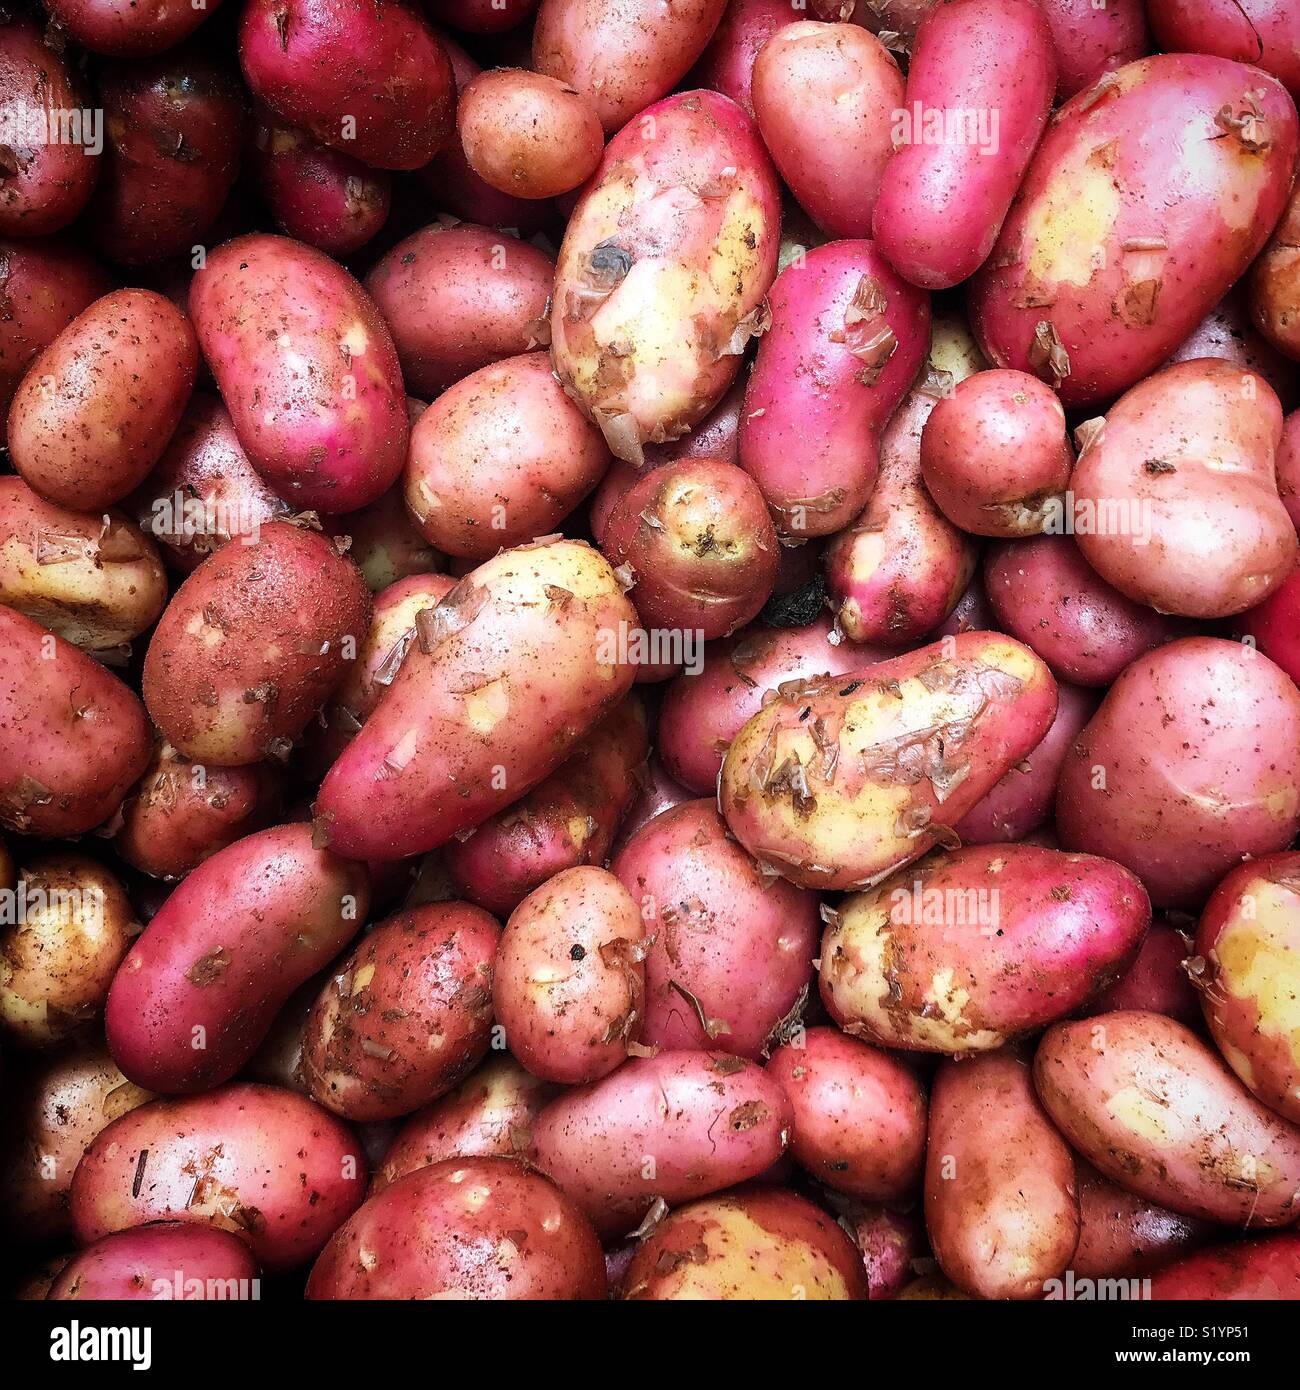 Red potatoes for sale in a street market in Tangier, Morroco, Africa Stock Photo